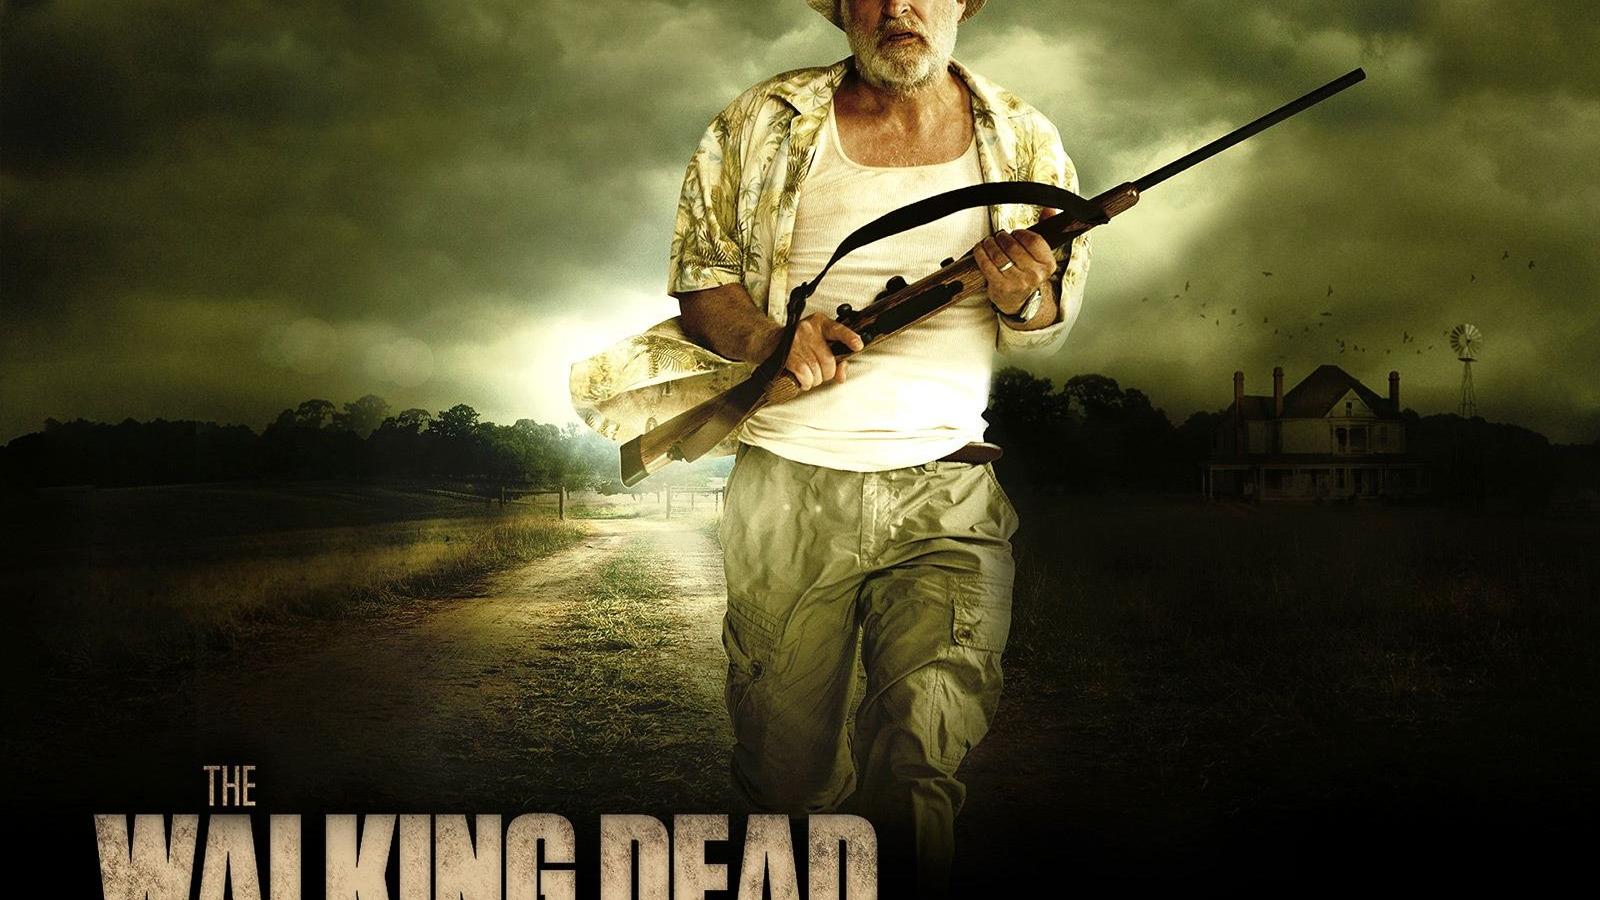 Wallpaper hd the walking dead dale - (#36466) - High Quality and ...